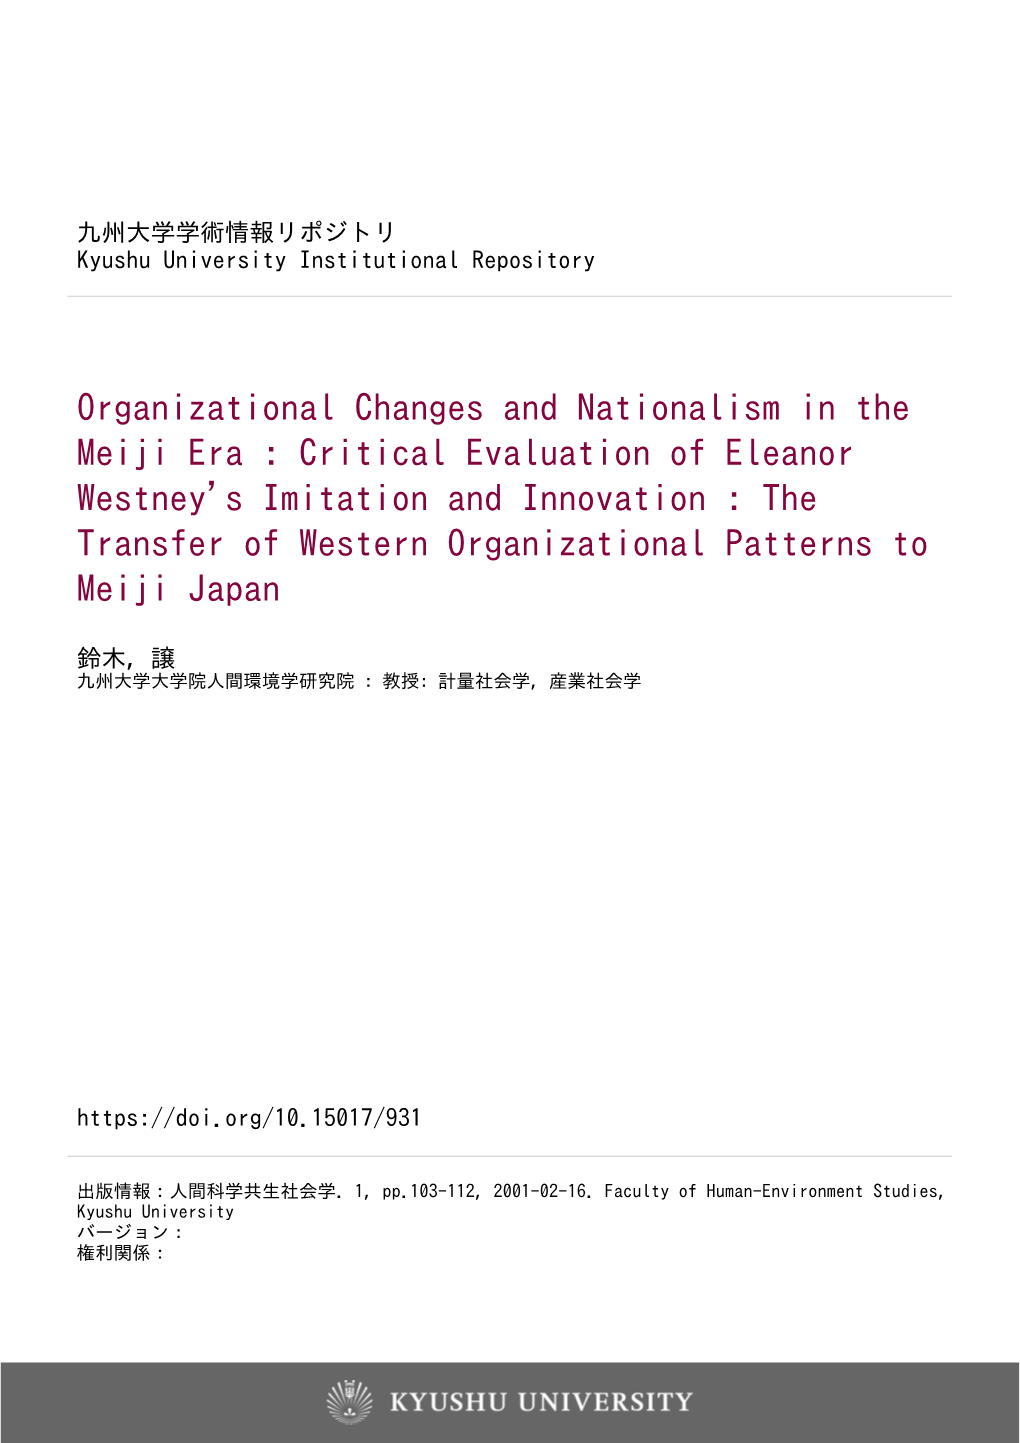 Organizational Changes and Nationalism in the Meiji